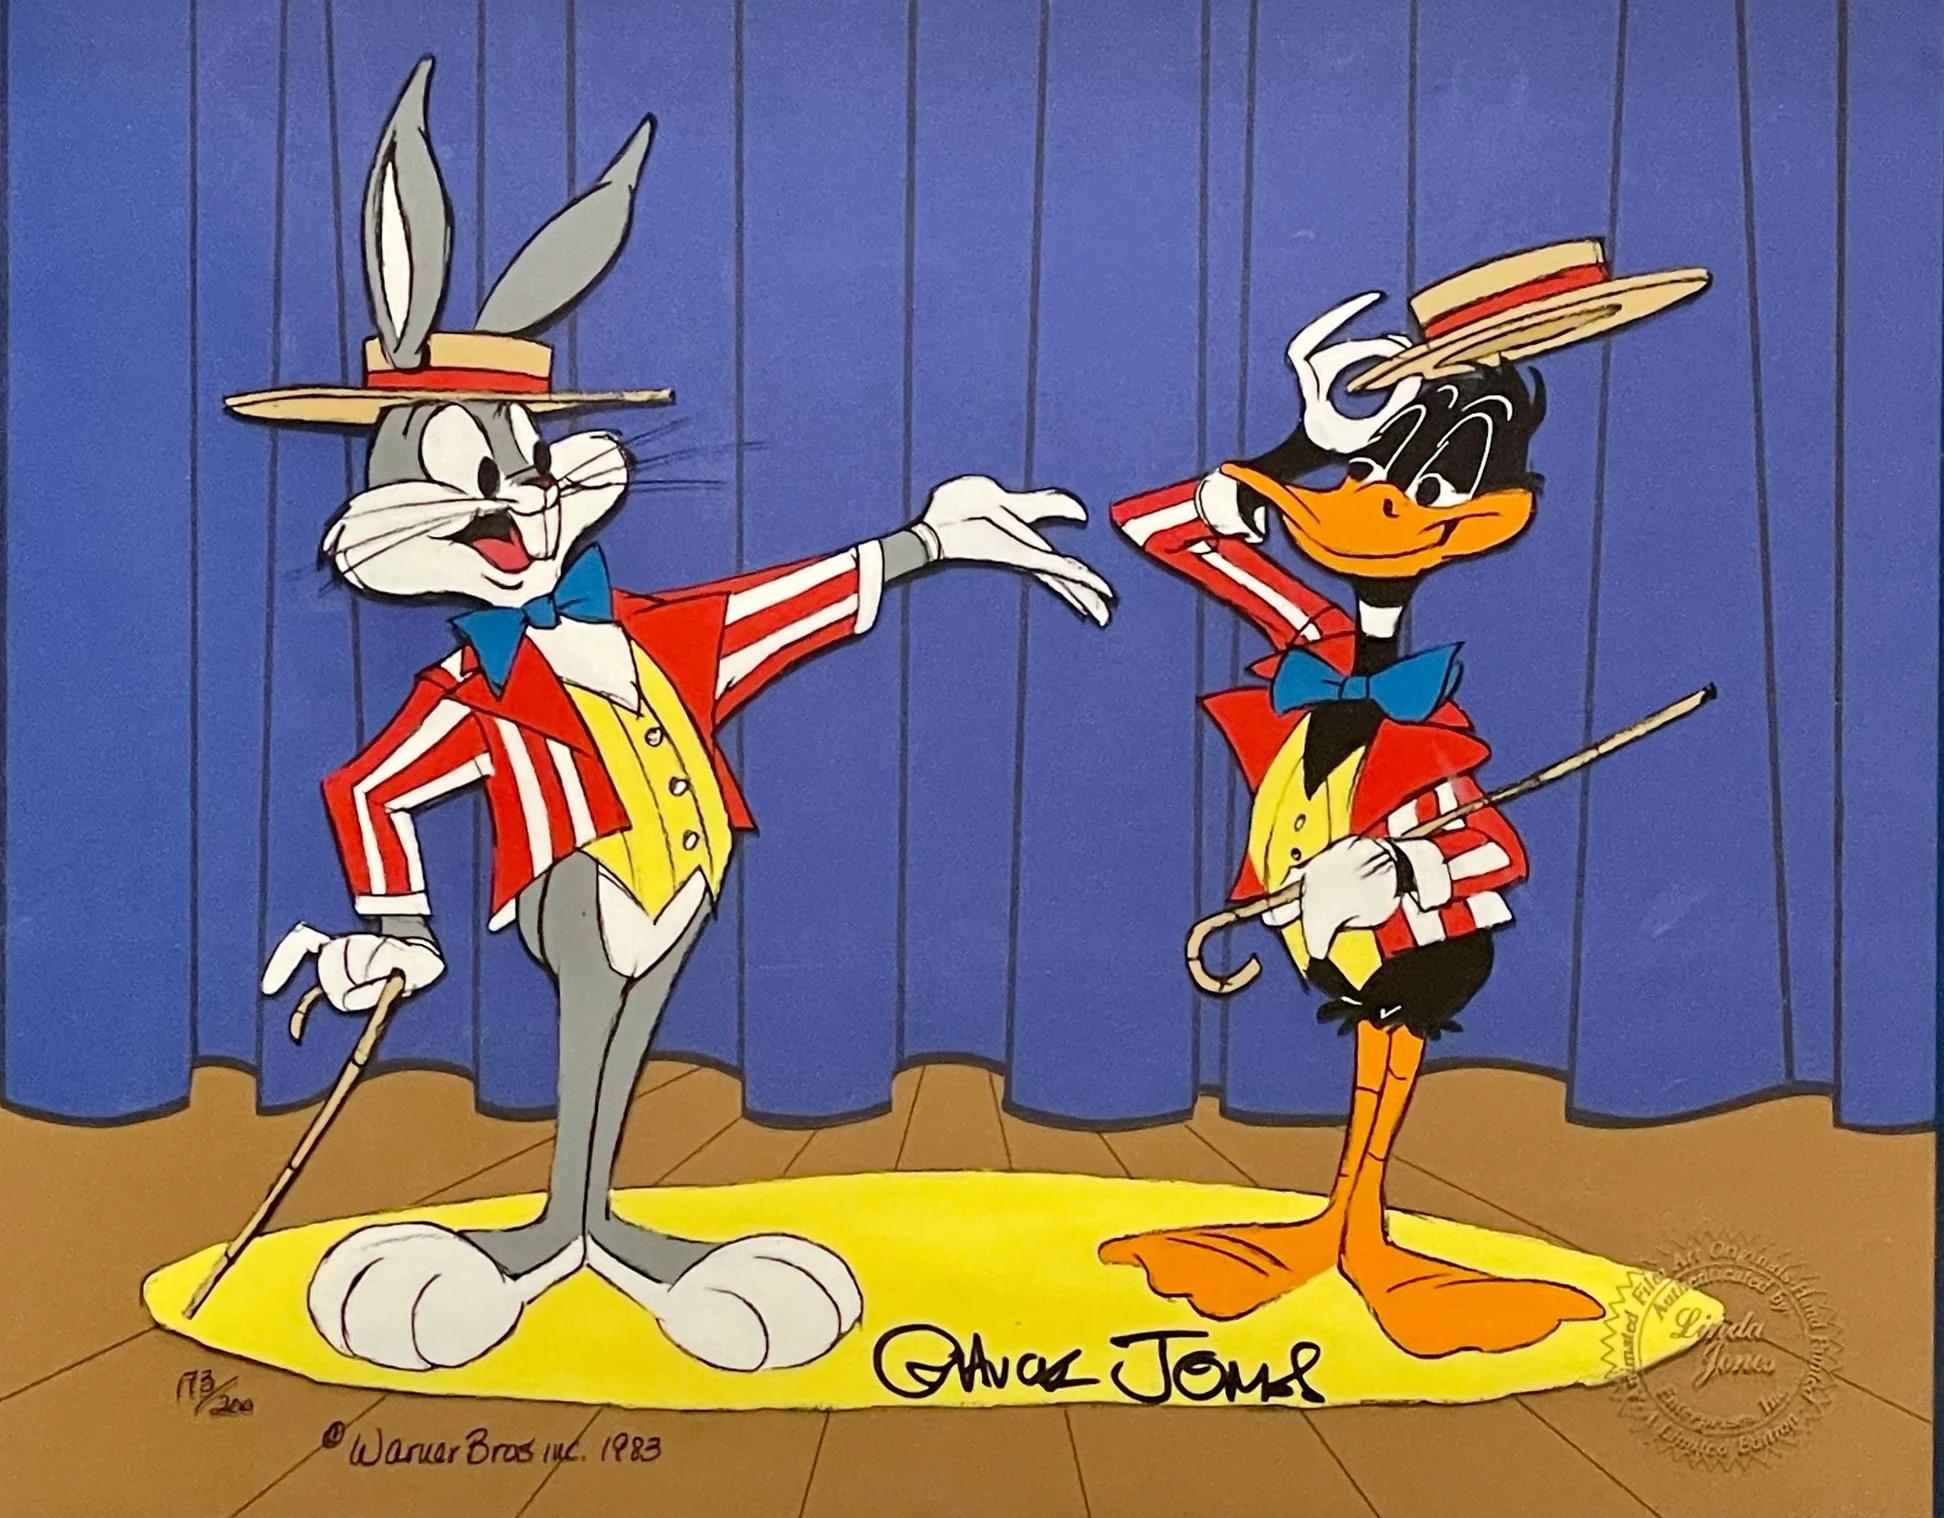 MEDIUM: Limited Edition Cel
IMAGE SIZE: 12 Field
EDITION SIZE: 200
SKU: CCV2728

ABOUT THE IMAGE: This cel is hand-signed by Chuck Jones and is numbered 173/200.